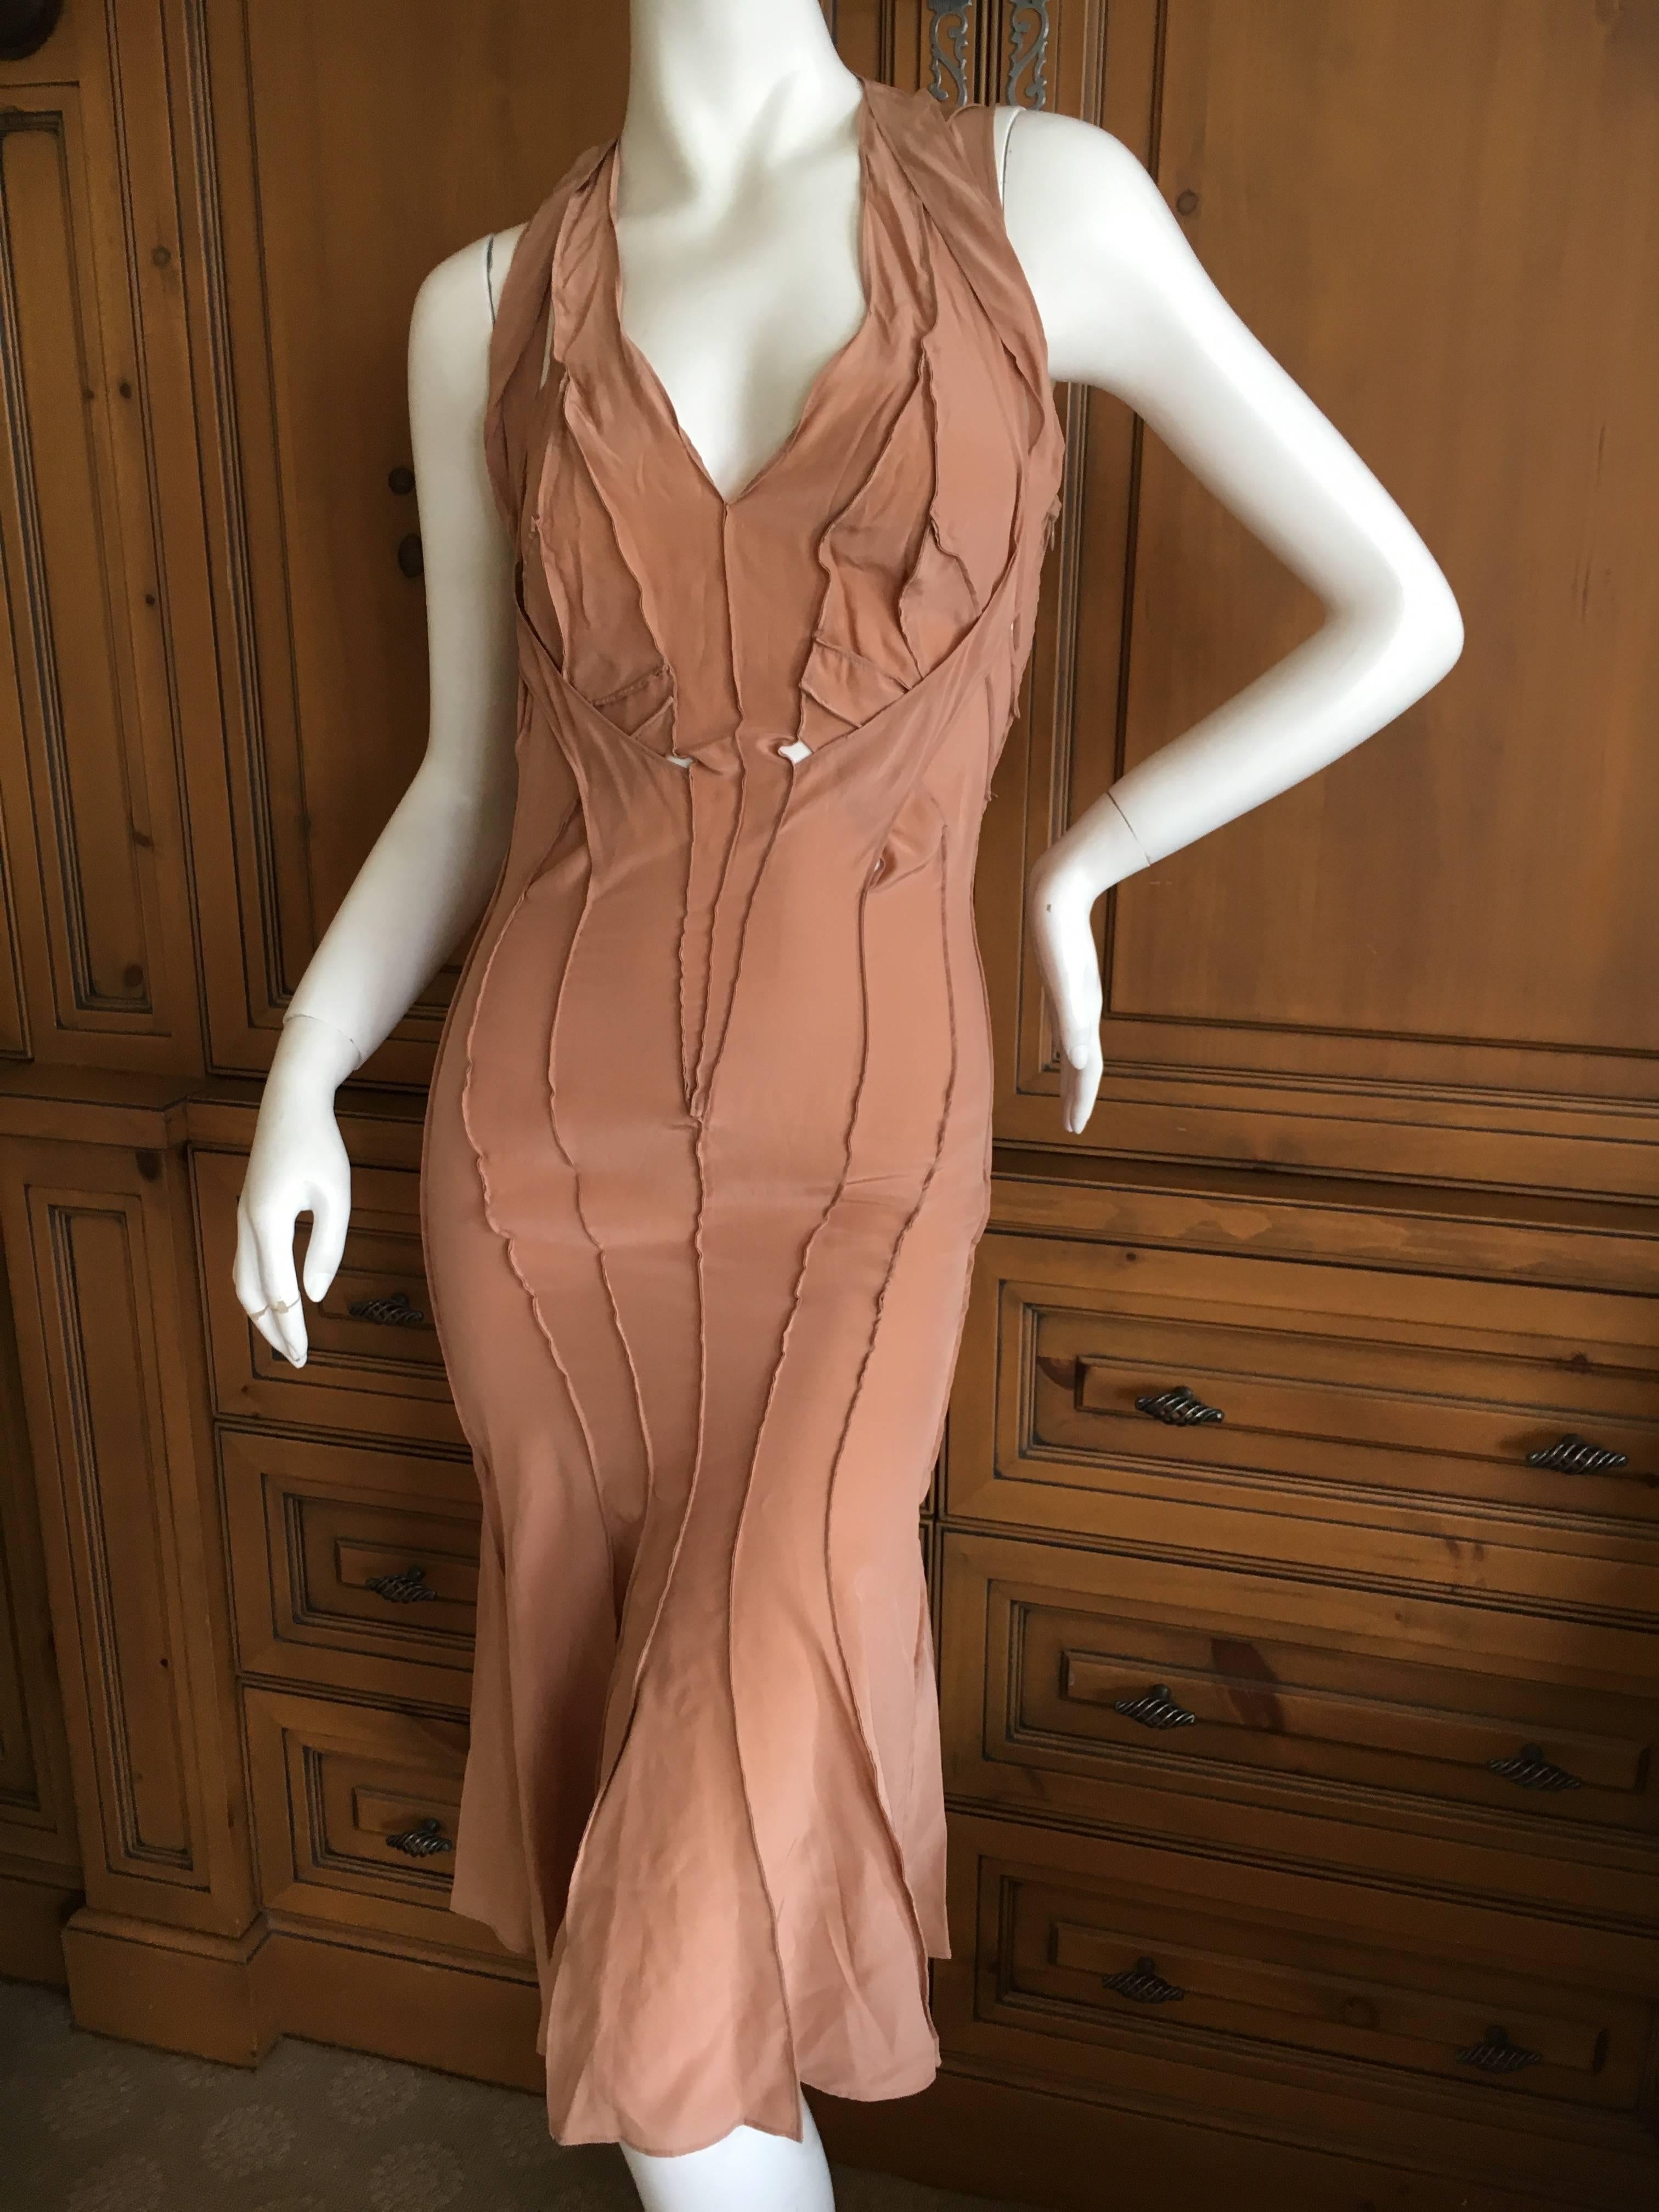 Yves Saint Laurent by Tom Ford 2002 Silk Dress Size 36 For Sale 1